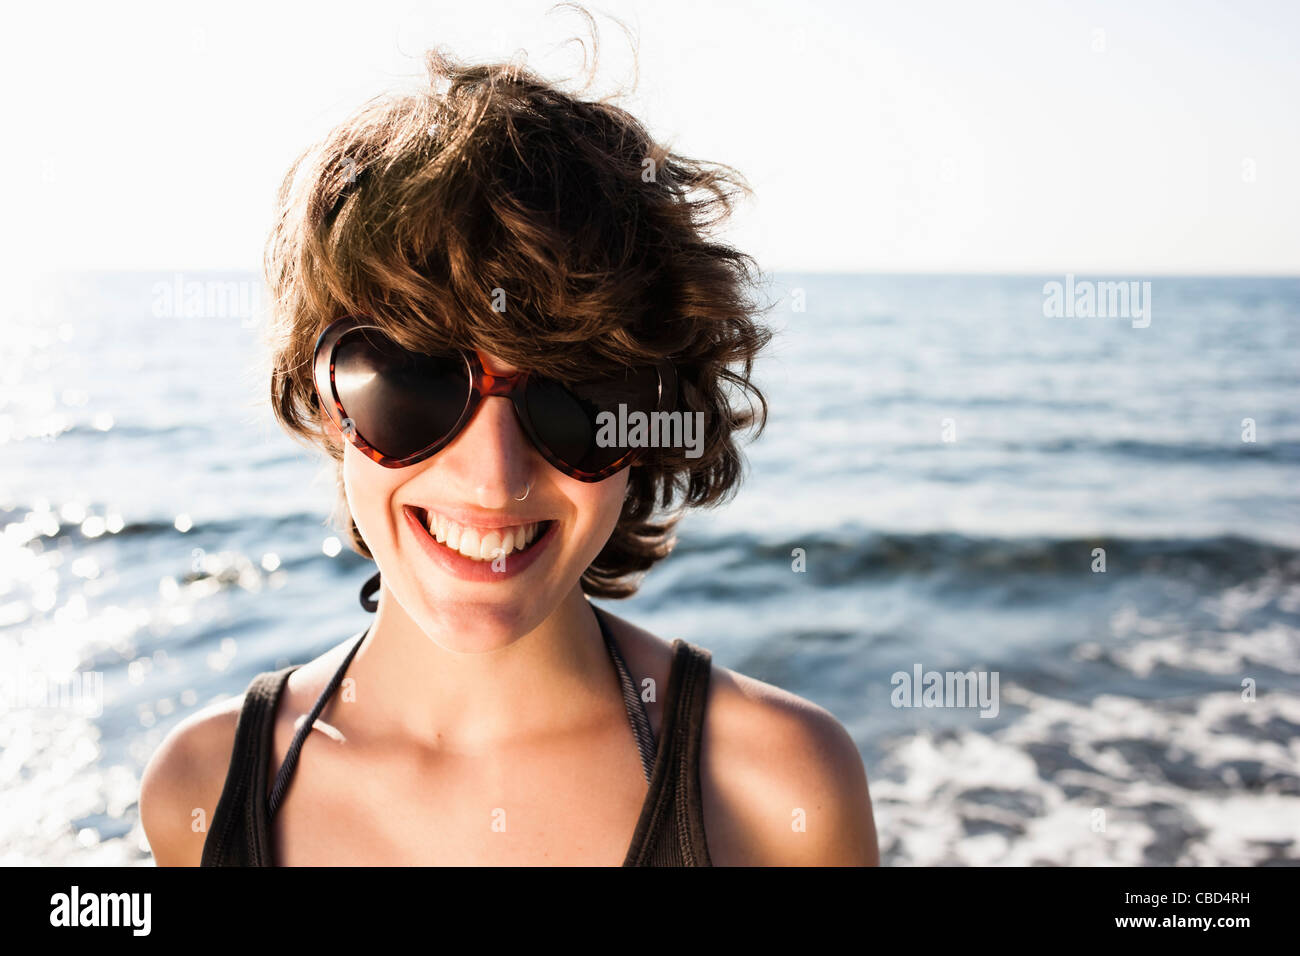 Smiling woman in sunglasses on beach Stock Photo